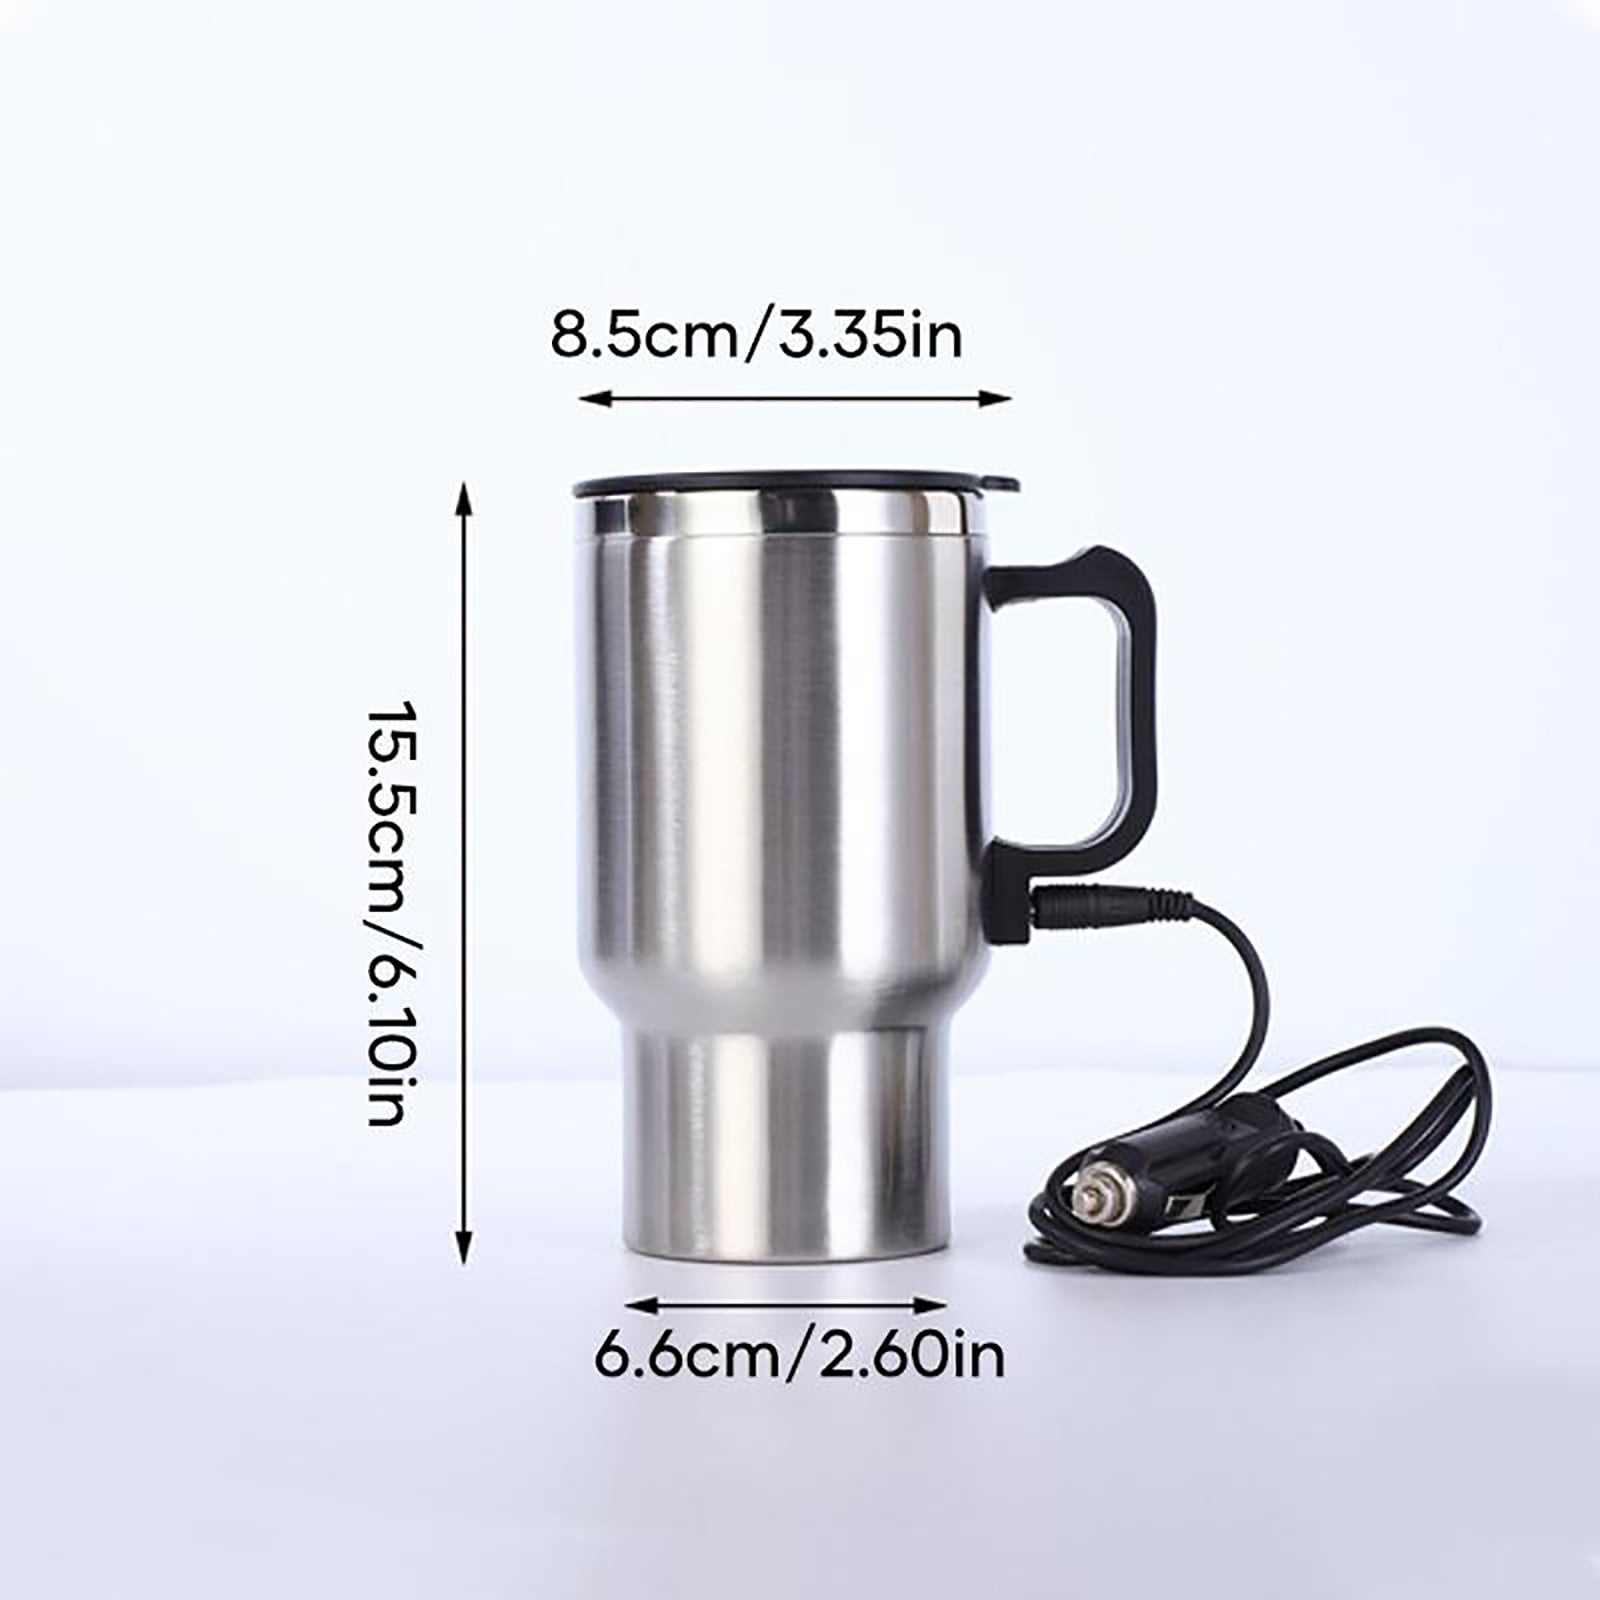 Heated Travel Mug for Car - Acouto Car Electric Kettle 450ml Stainless  Steel Heating Cup Coffee Tea Drinking Cup Travel Mug Black for Winter  Travel